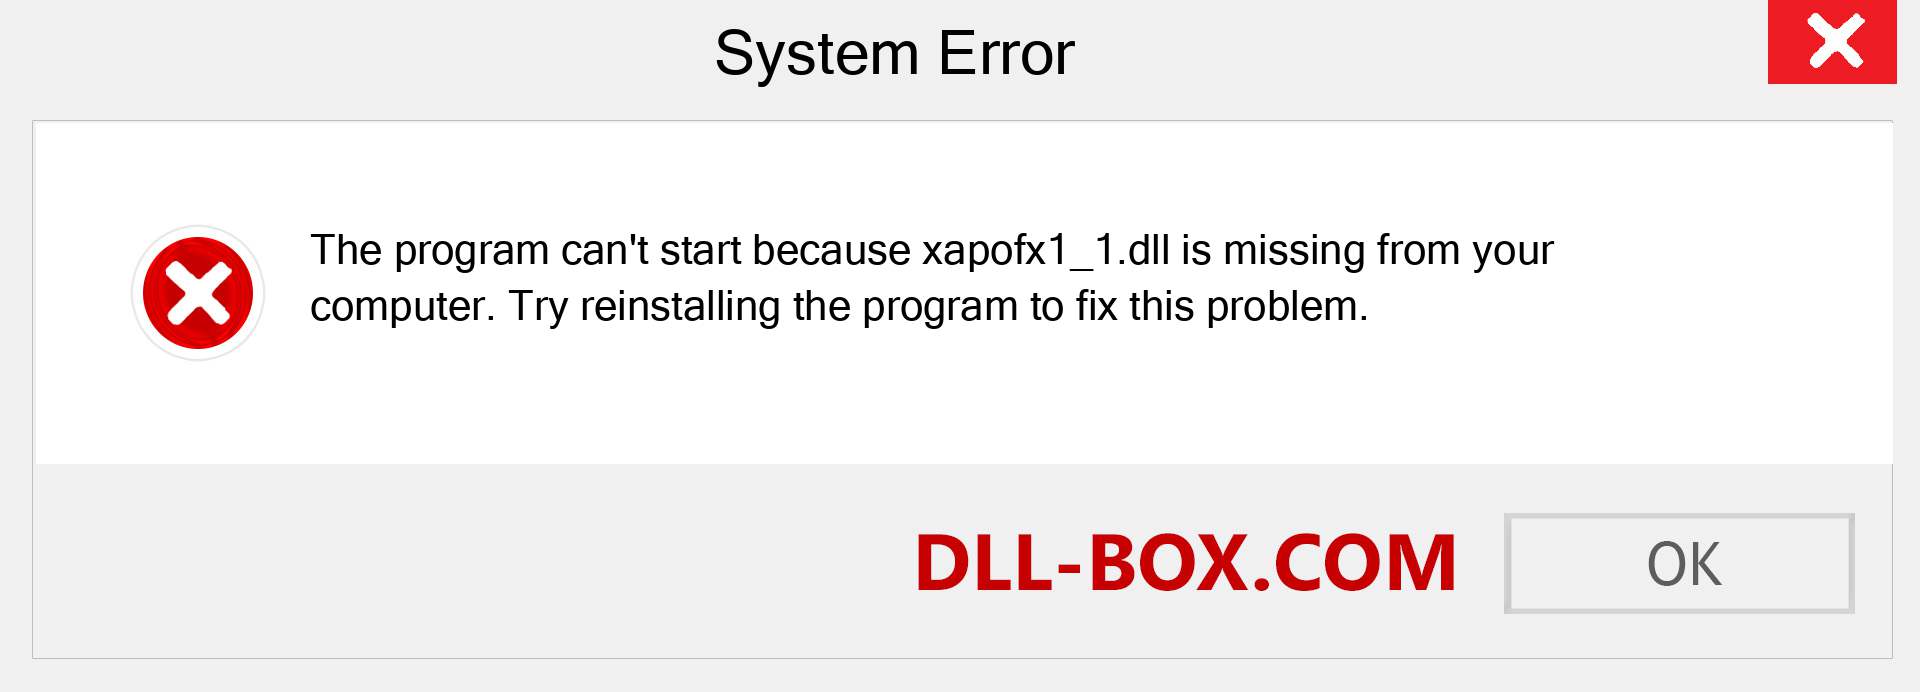  xapofx1_1.dll file is missing?. Download for Windows 7, 8, 10 - Fix  xapofx1_1 dll Missing Error on Windows, photos, images